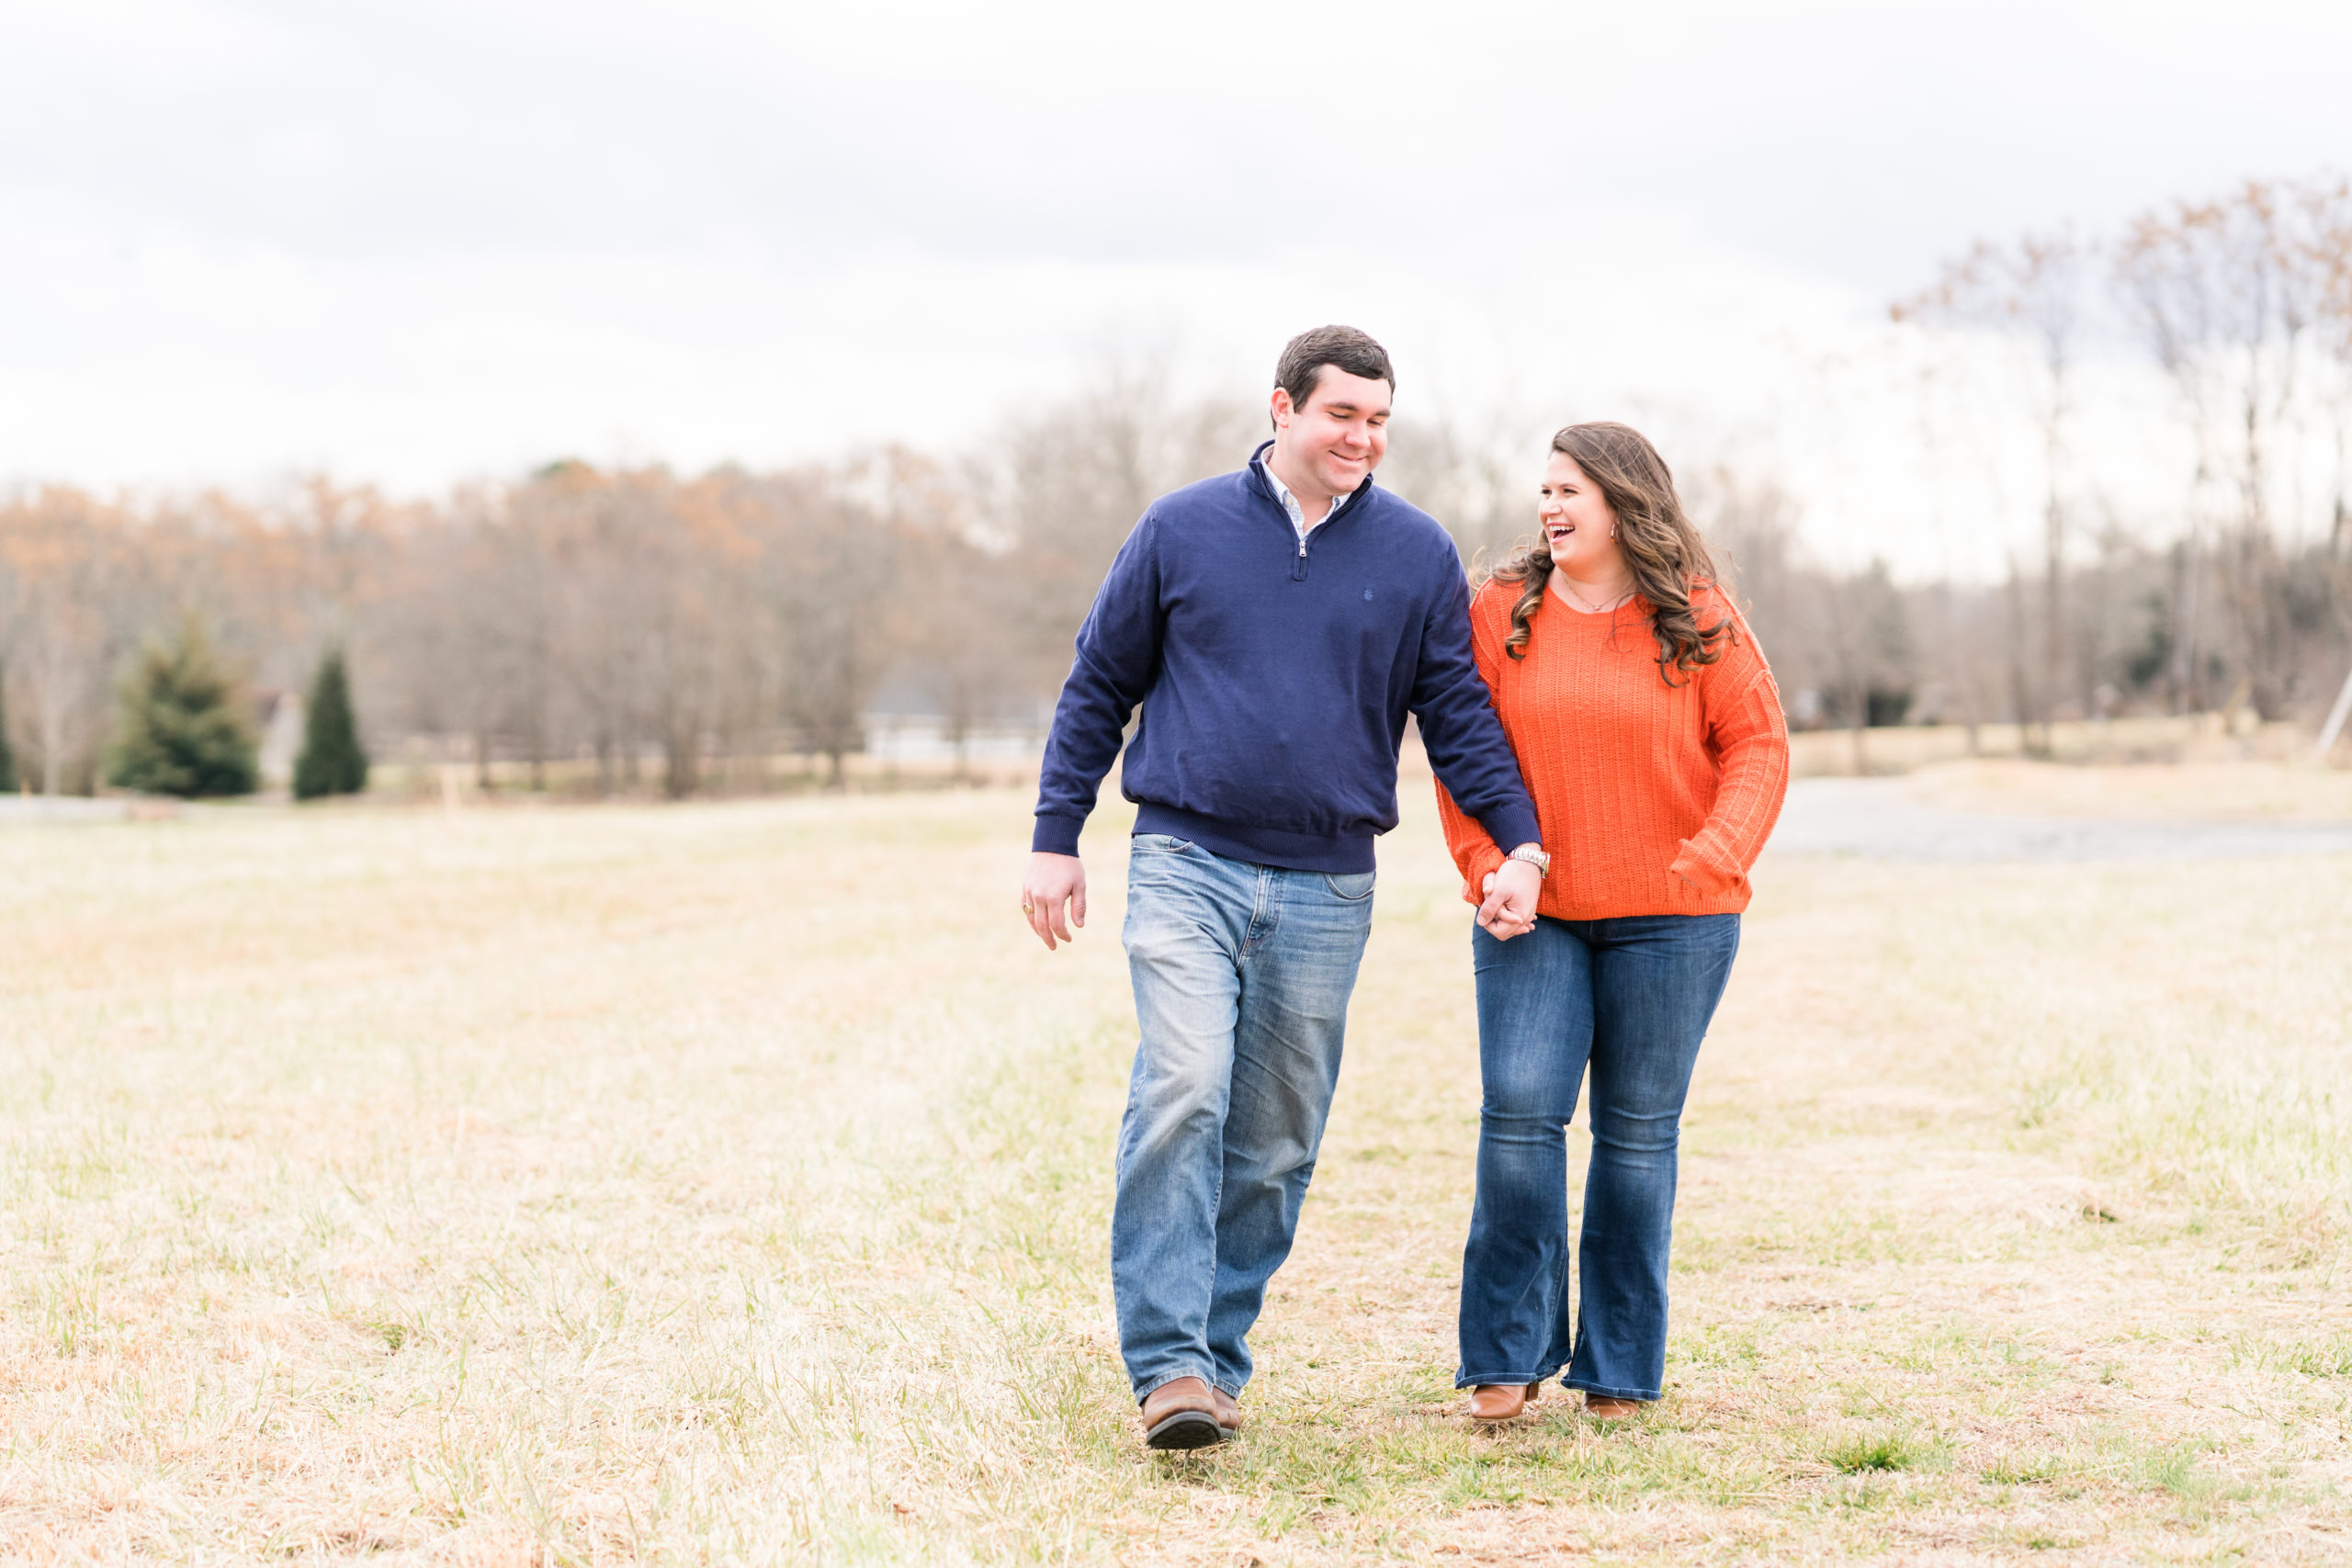 Outdoor-Couples-Photography-Greenville-SC-Jenny-Williams photography